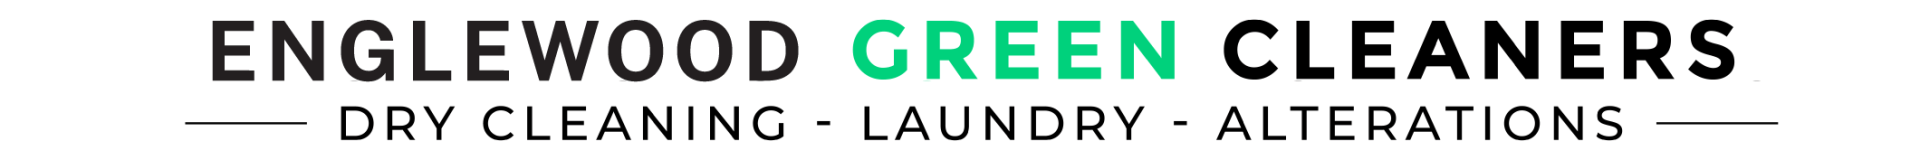 Englewood Green Cleaners - Dry Cleaning, Laundry and Alterations